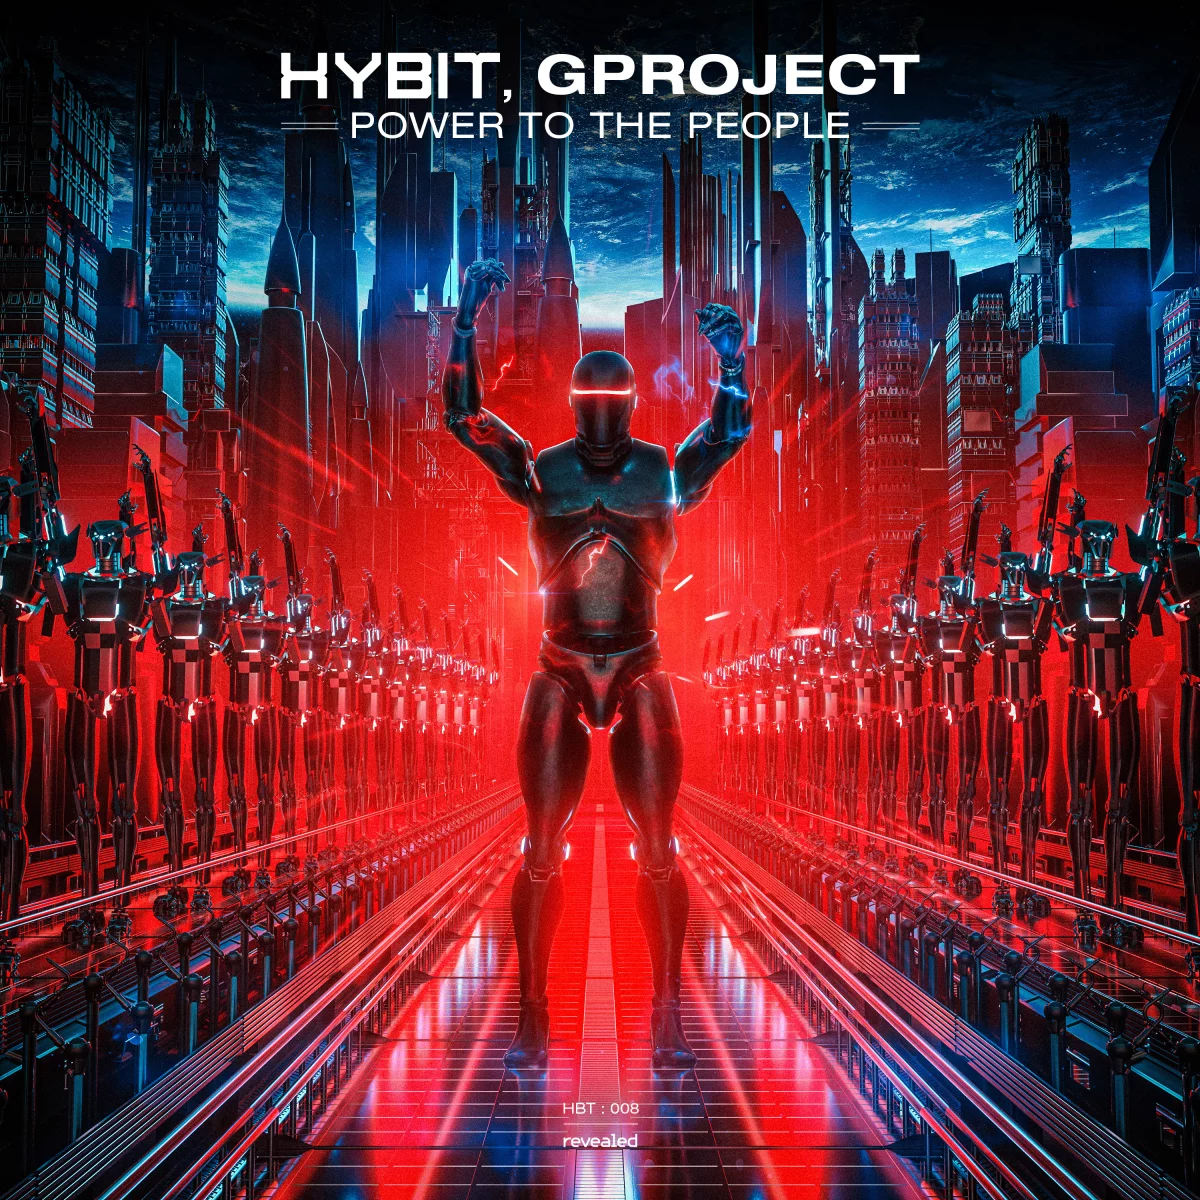 Power To The People - HYBIT⁠, Gproject⁠